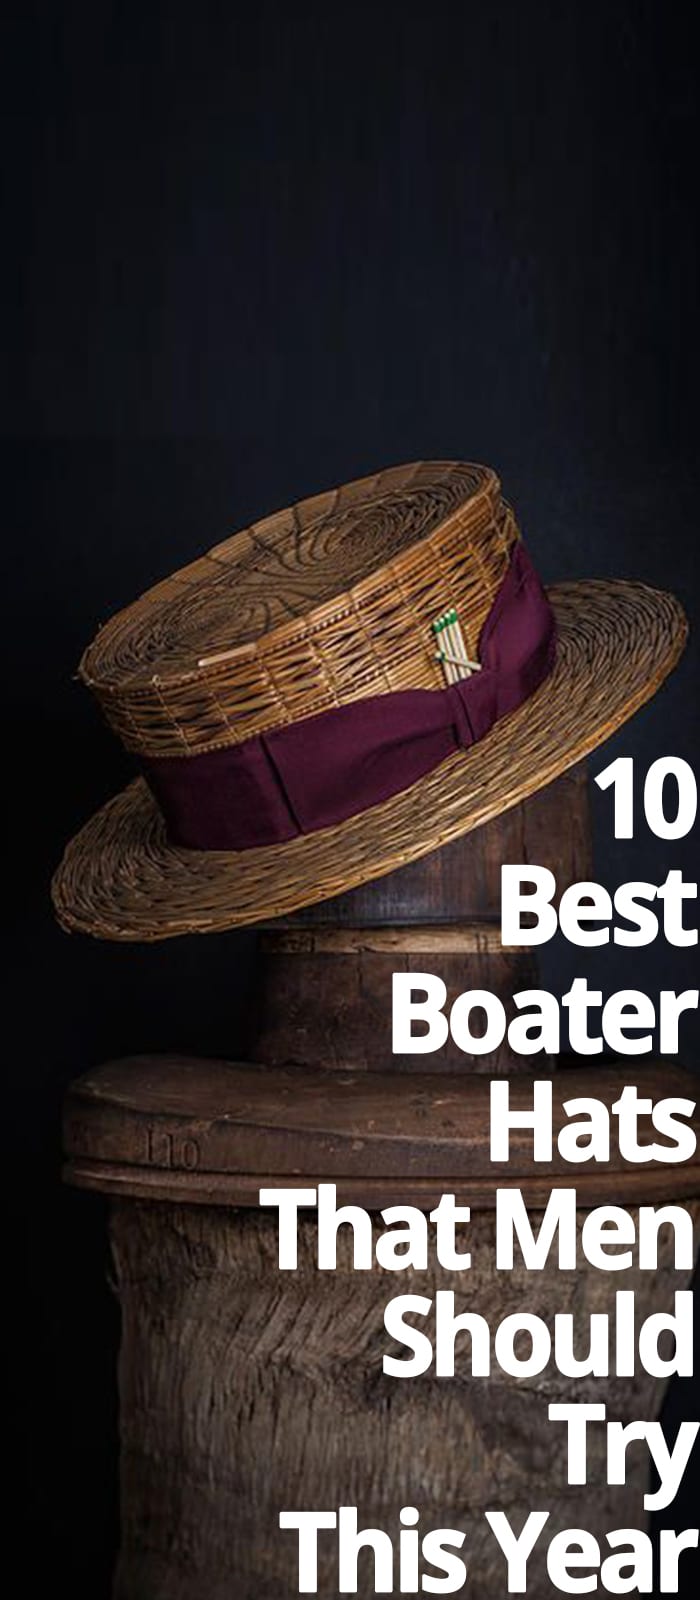 BOATER HATS THAT MEN SHOULD TRY THIS YEAR